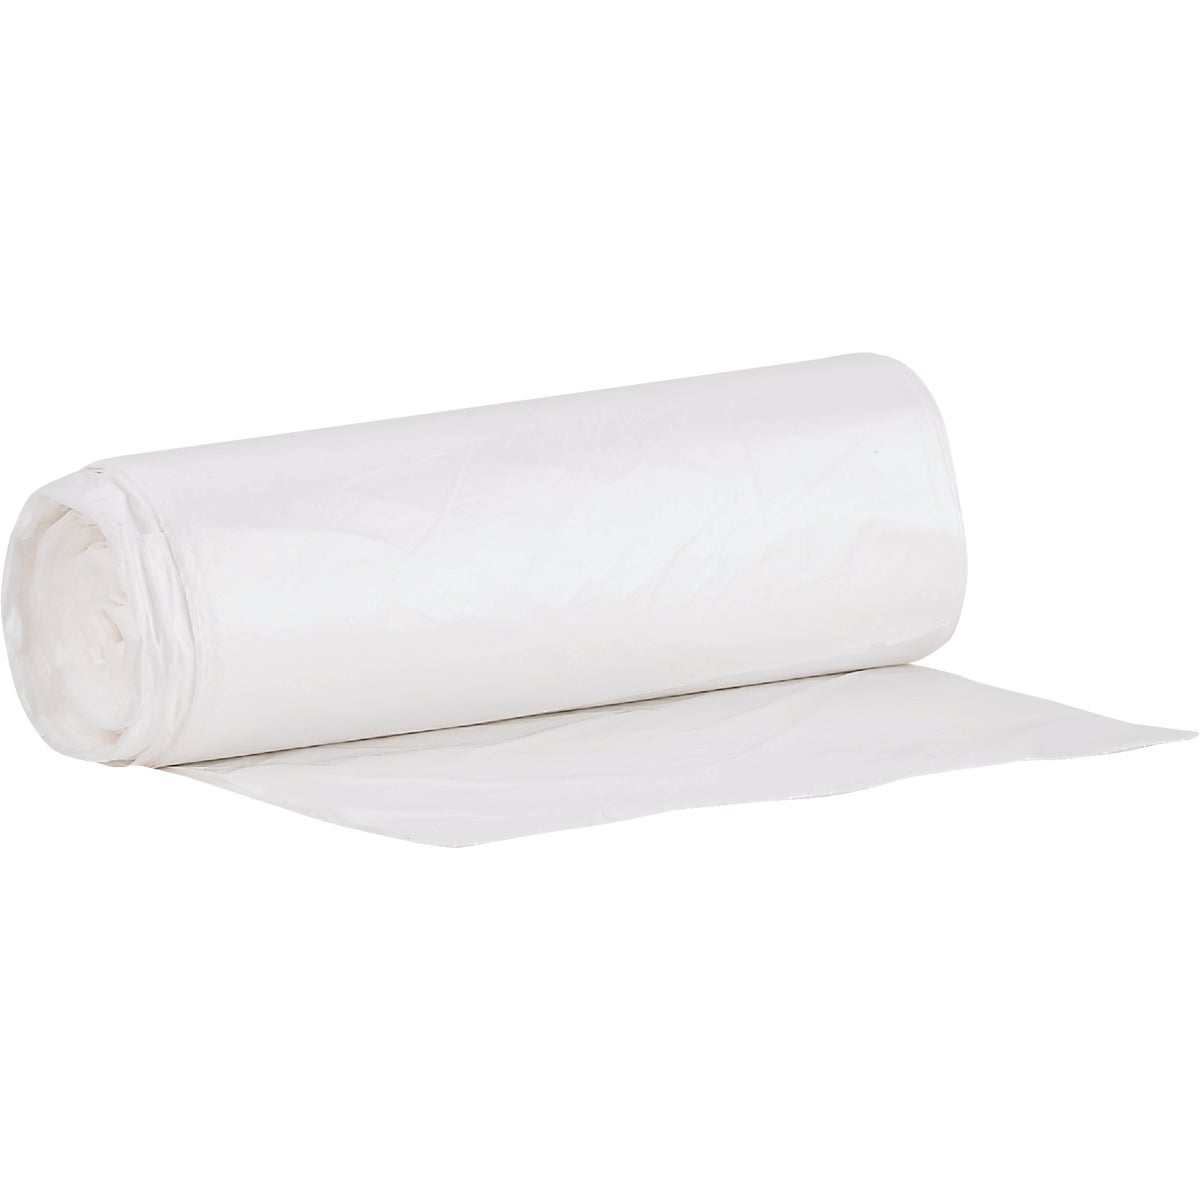 Item 632074, High density can liner is ideal for heavy, soft, and wet refuse.